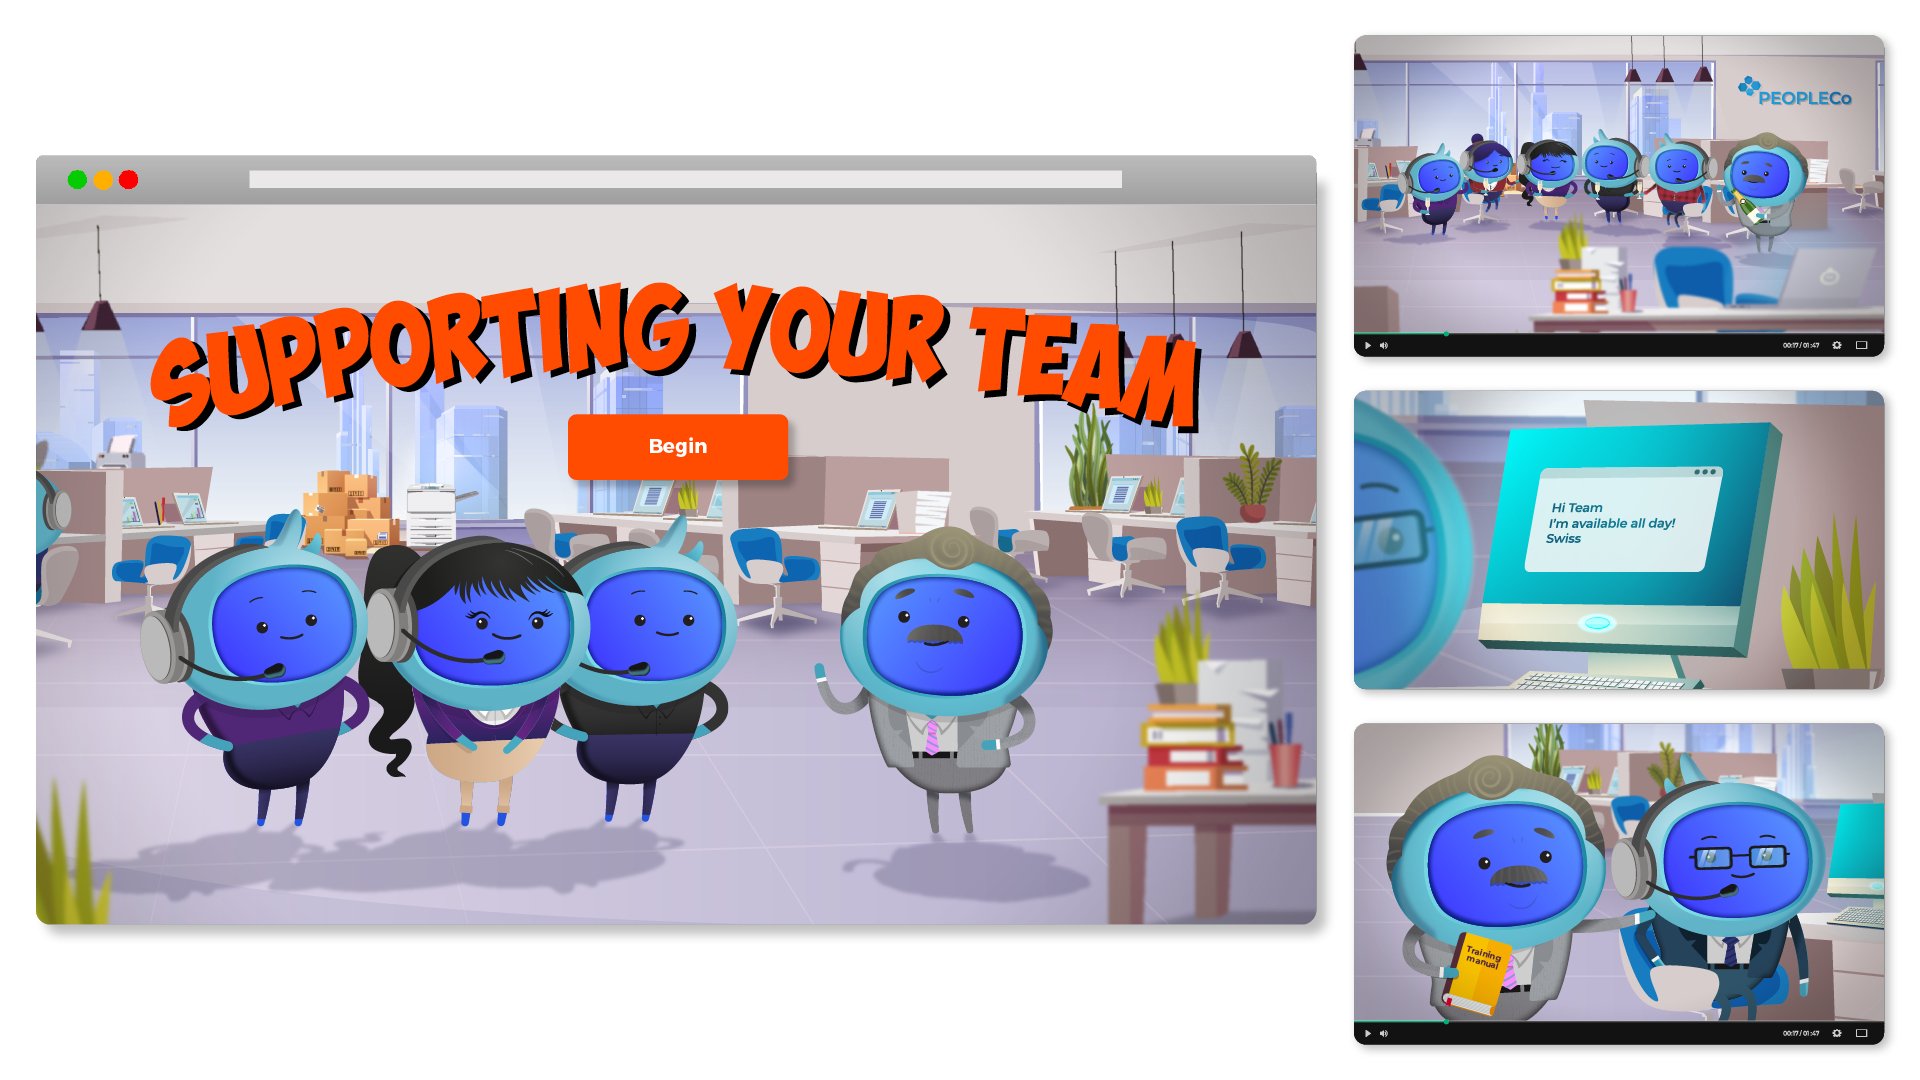 iAM Supporting Your Team Landing Page Artwork 2